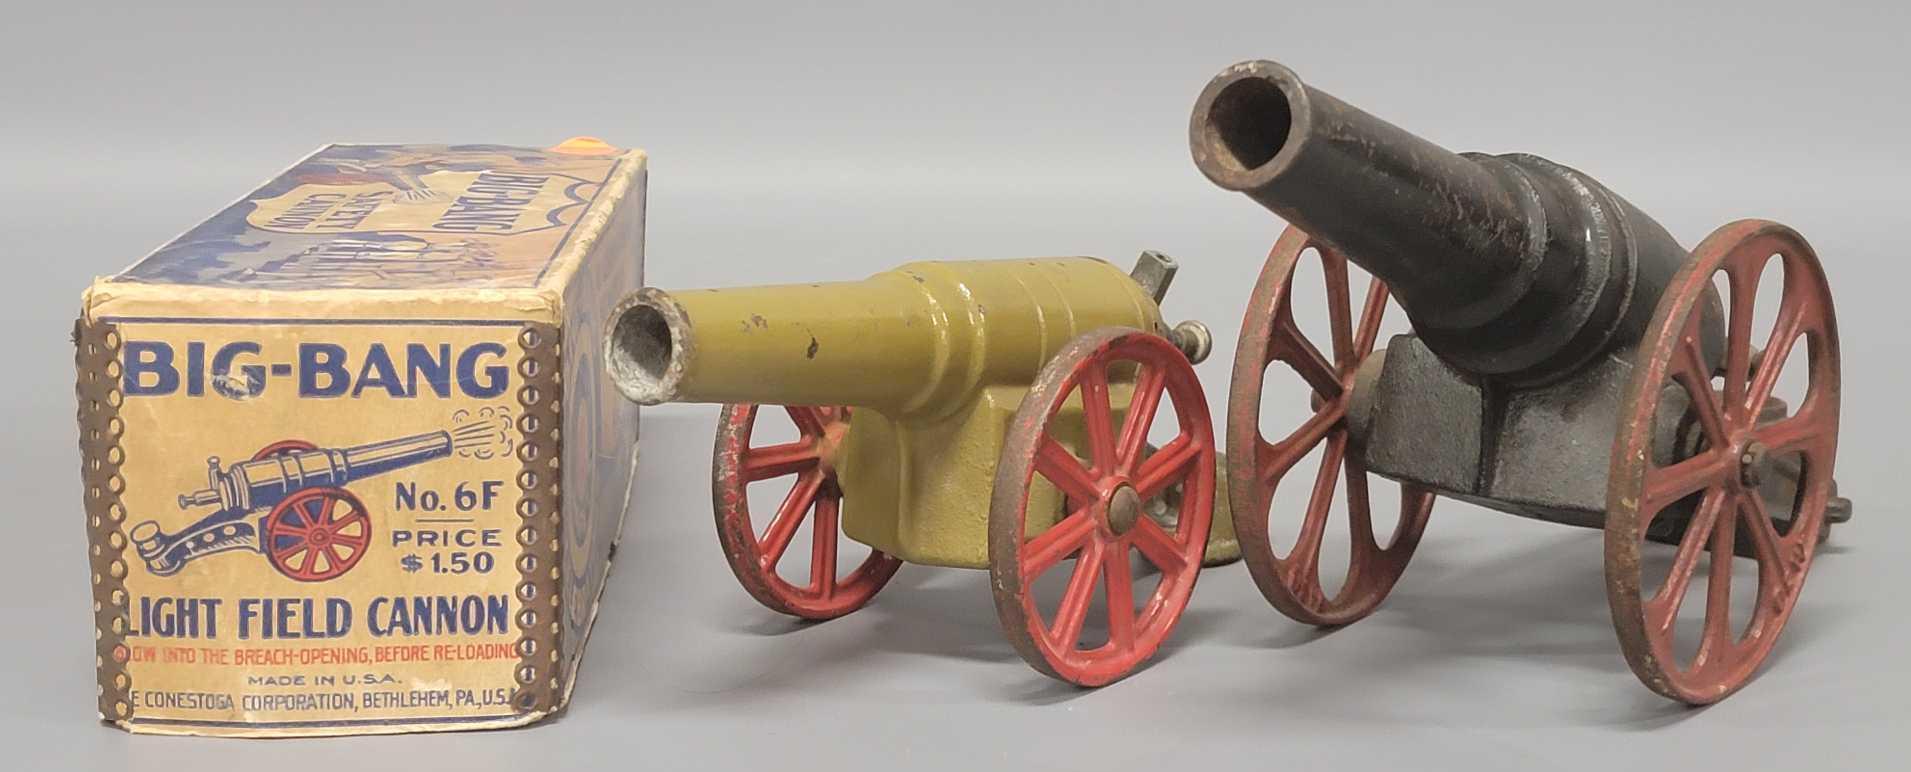 Two vintage Big-Bang cannons with one in original box